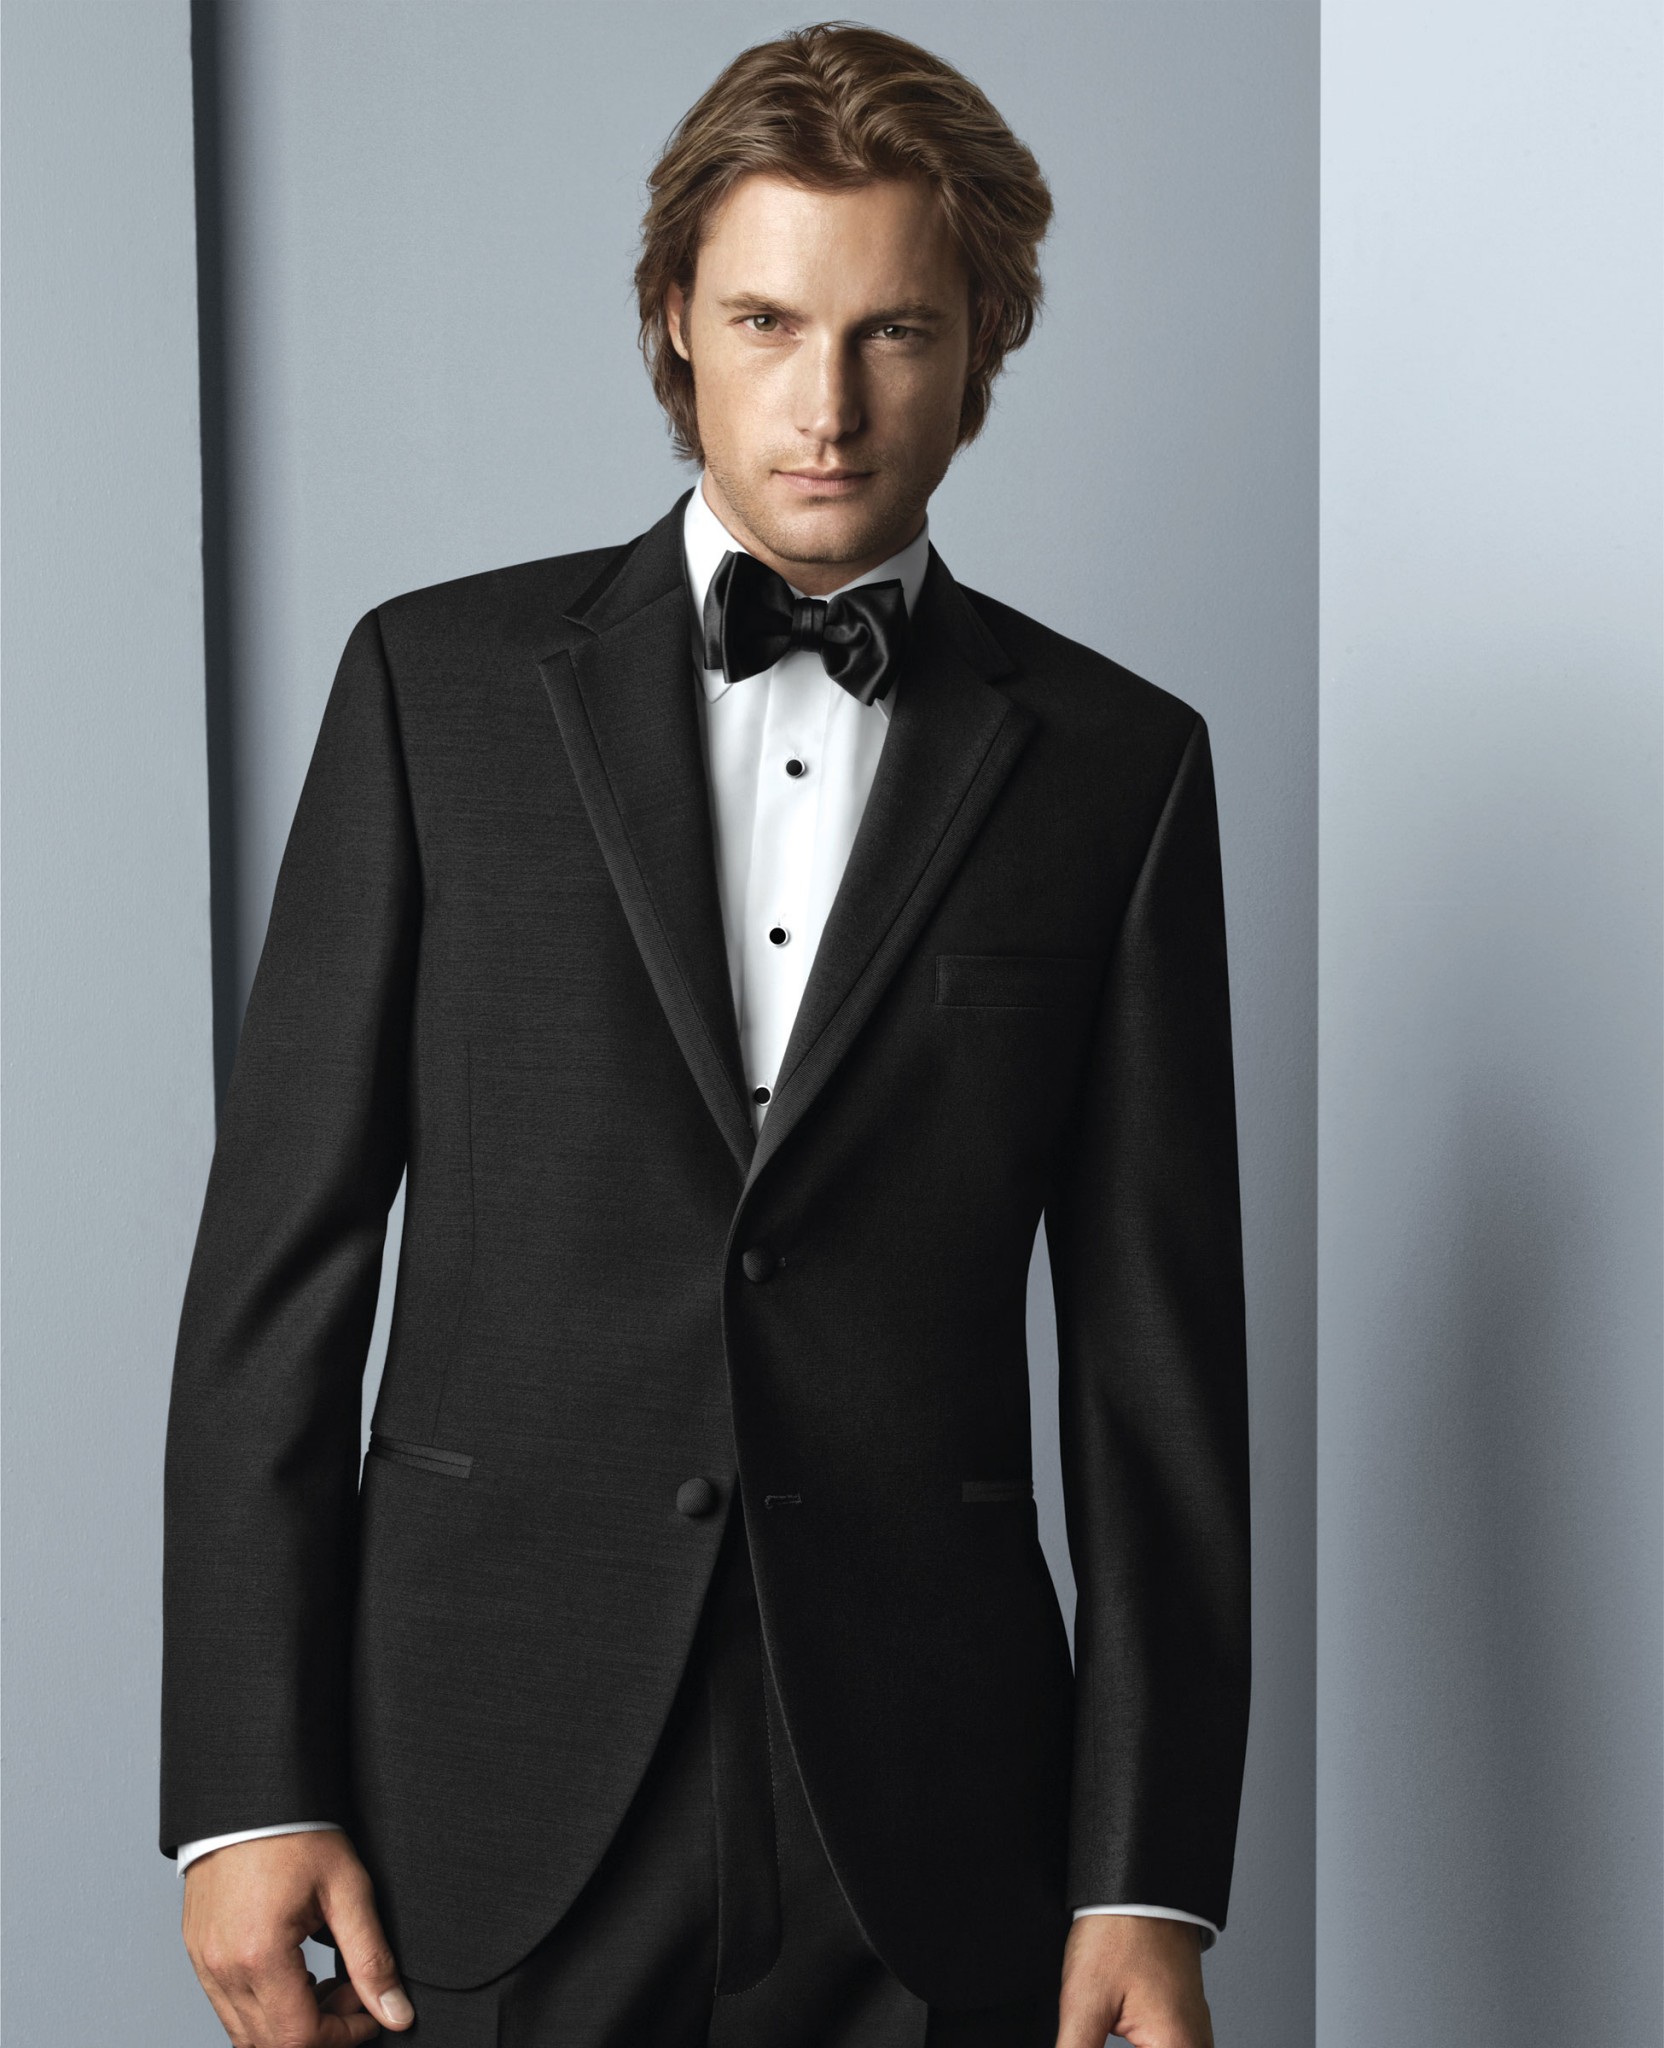 Latest Men's Suits 2013-2014 | Top Brands For Business Suits